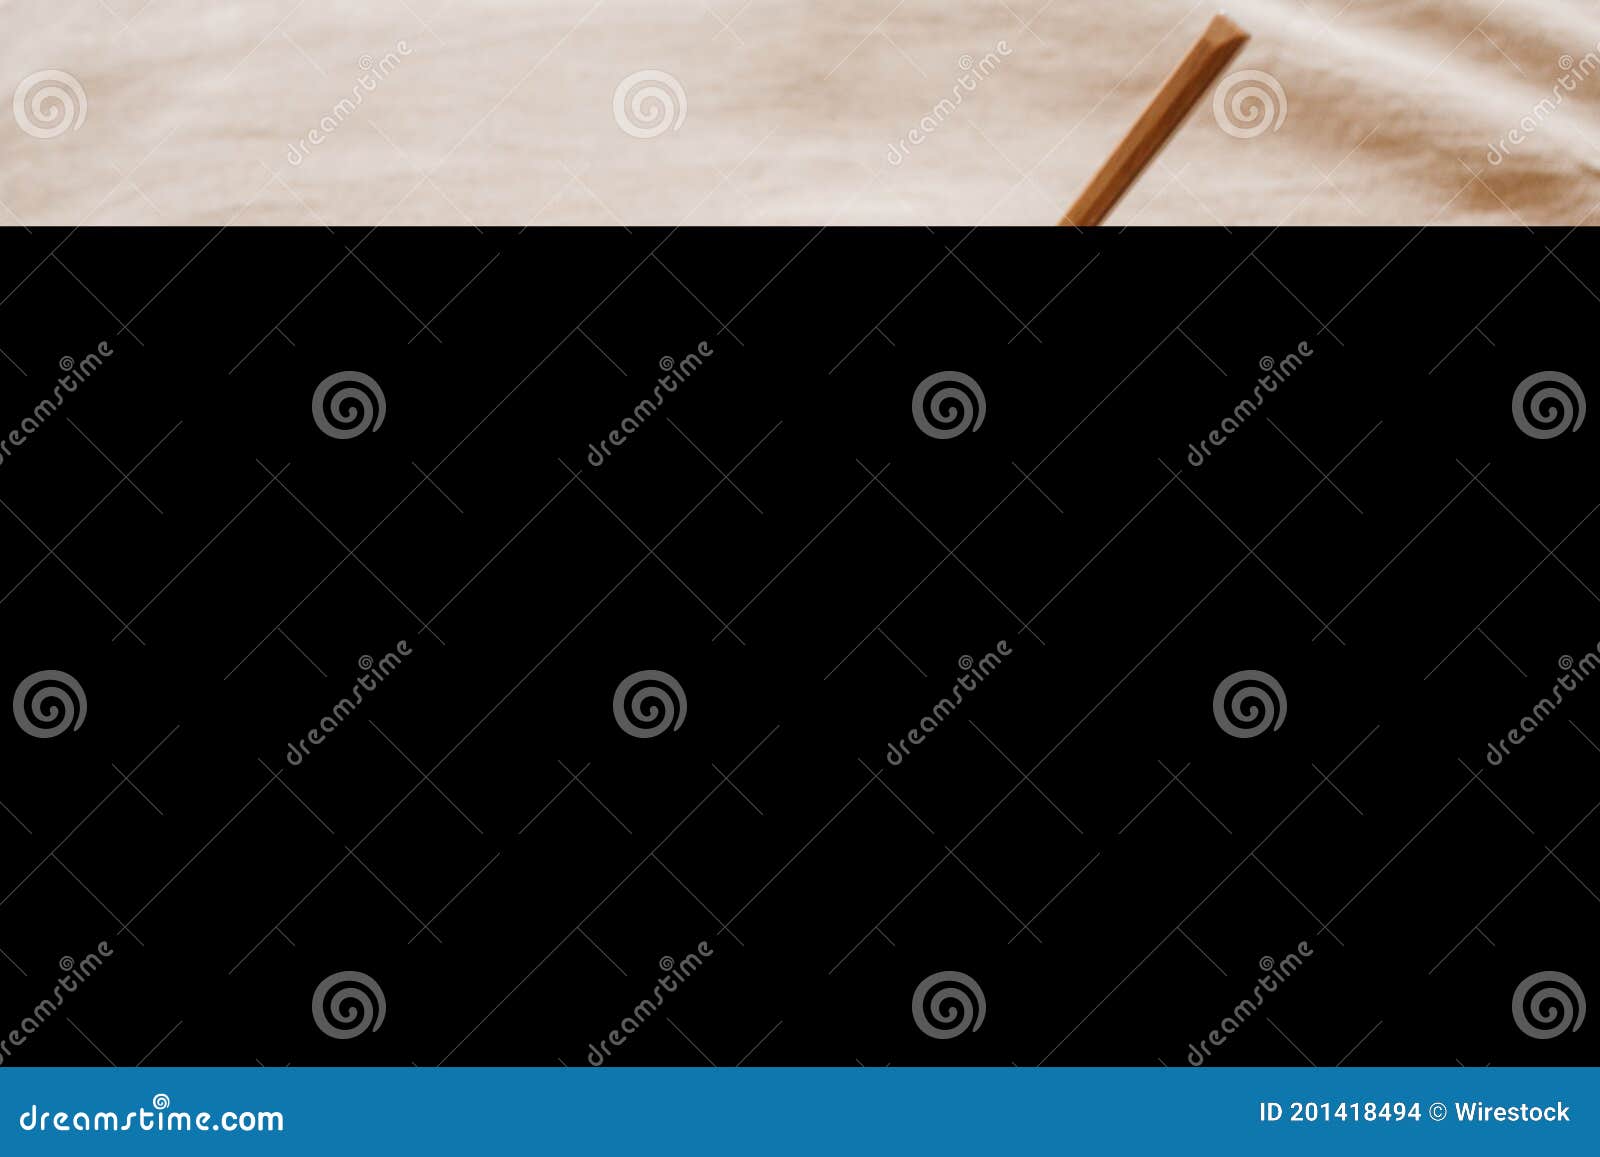 panela sugar on rustic background with wooden spoon.